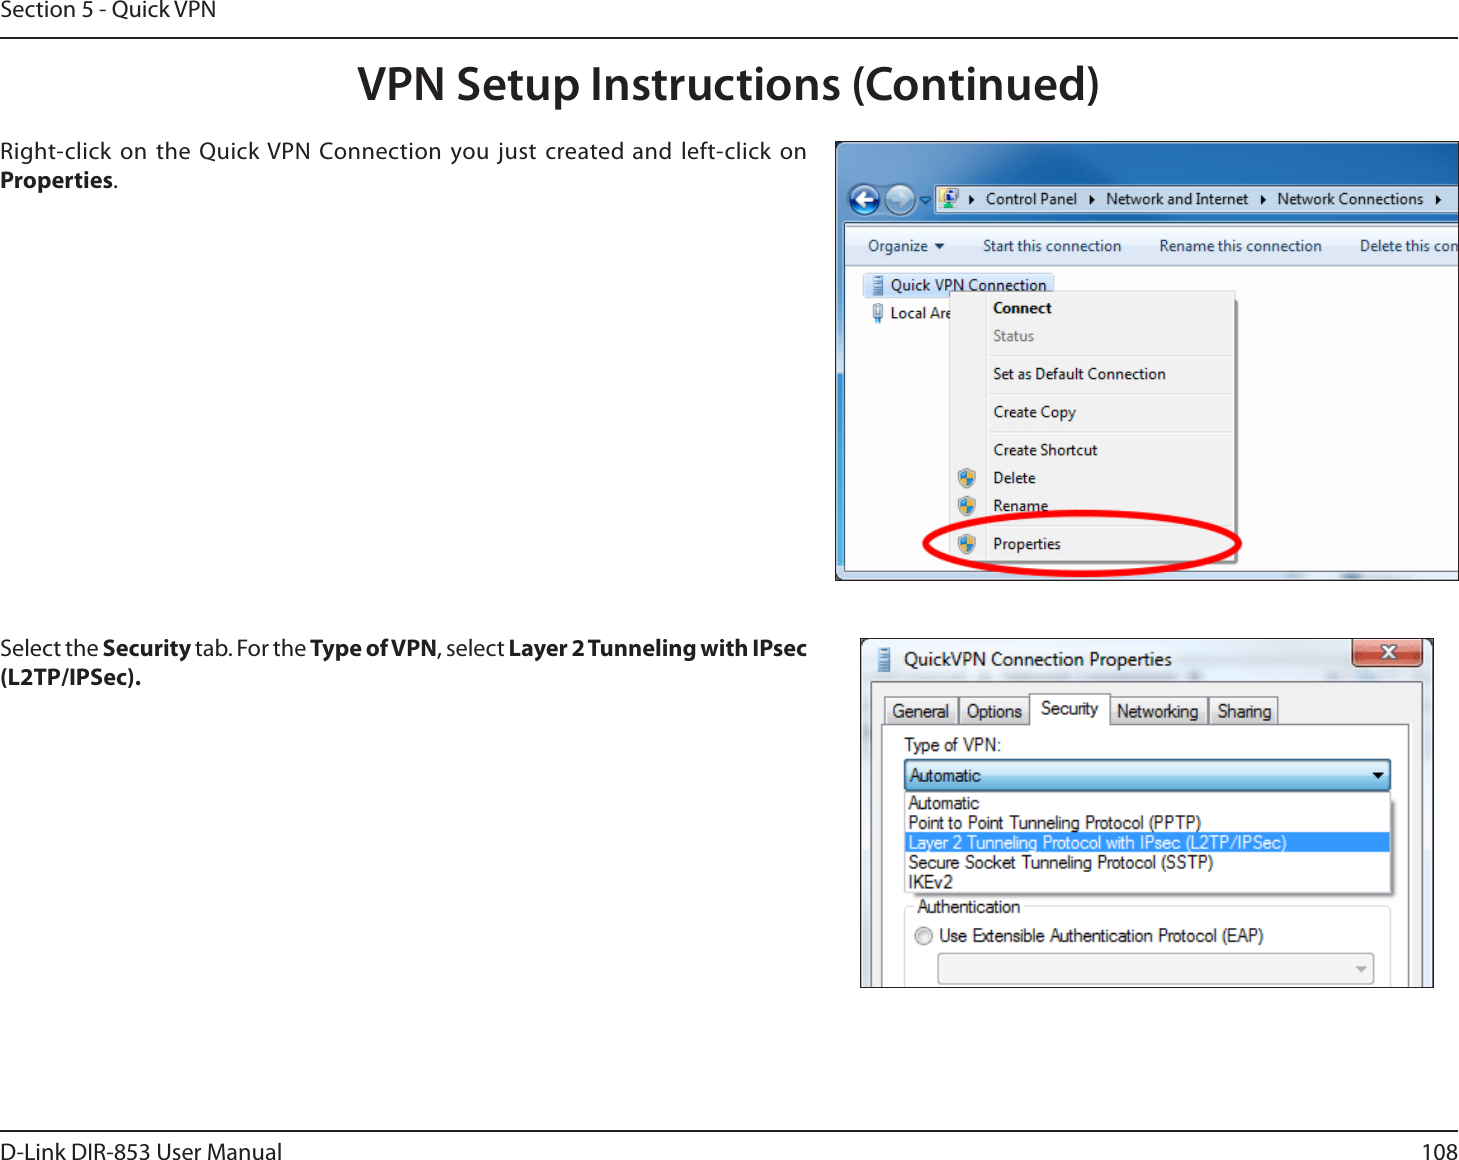 108D-Link DIR-853 User ManualSection 5 - Quick VPNSelect the Security tab. For the Type of VPN, select Layer2Tunneling with IPsec (L2TP/IPSec). Right-click on the Quick VPN Connection you just created and left-click on Properties.VPN Setup Instructions (Continued)